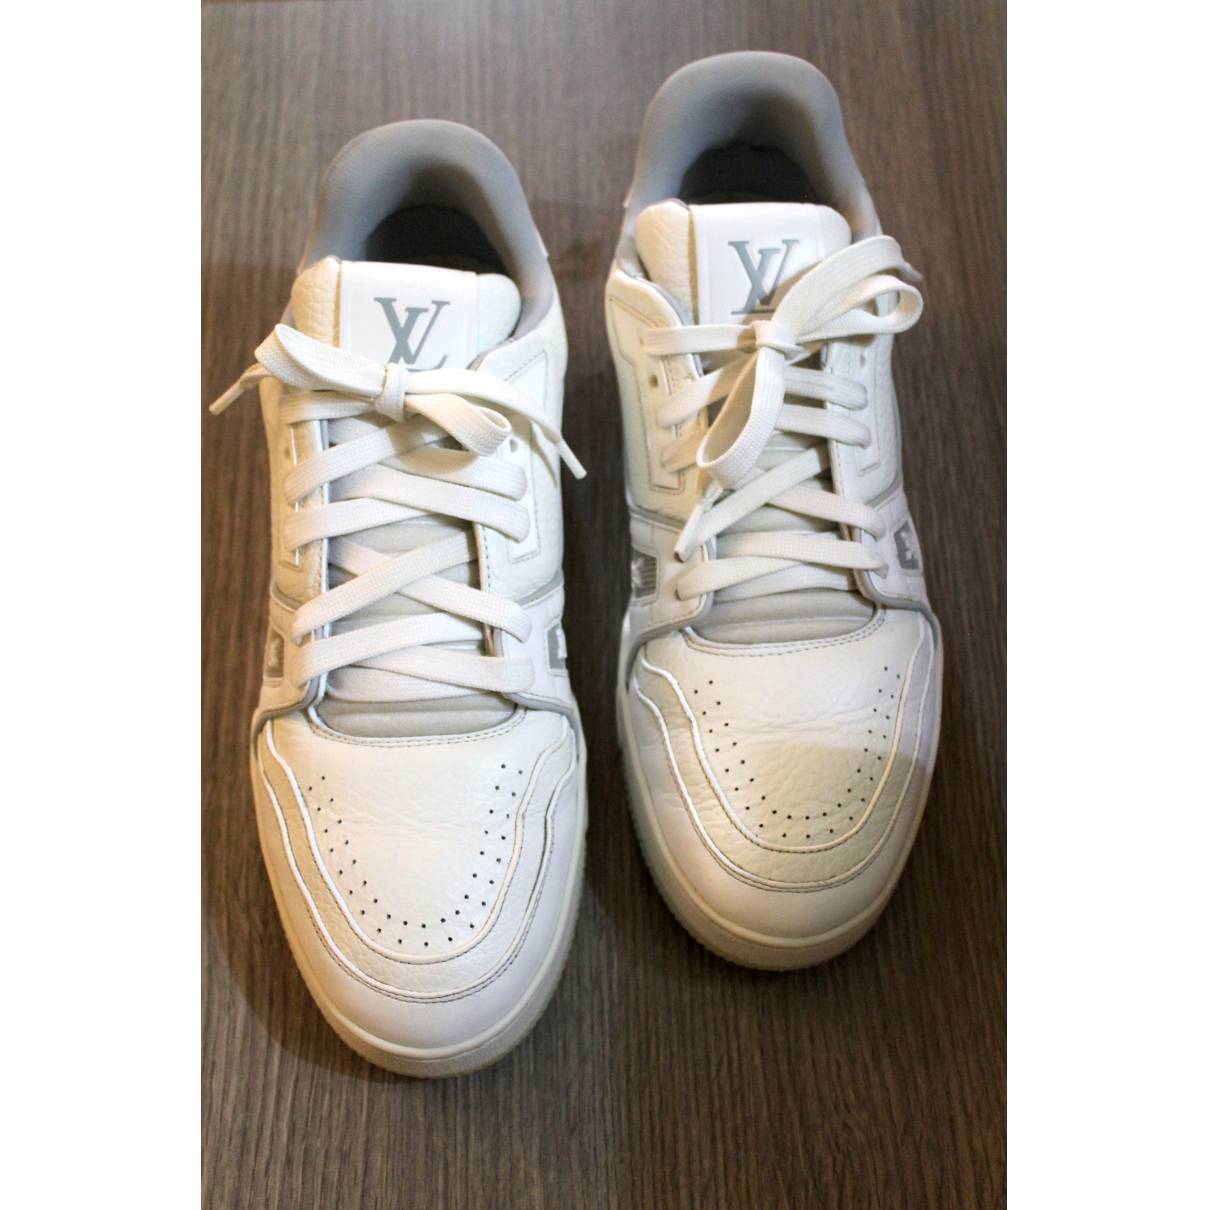 Louis Vuitton, Shoes, Gently Used Lv Trainer